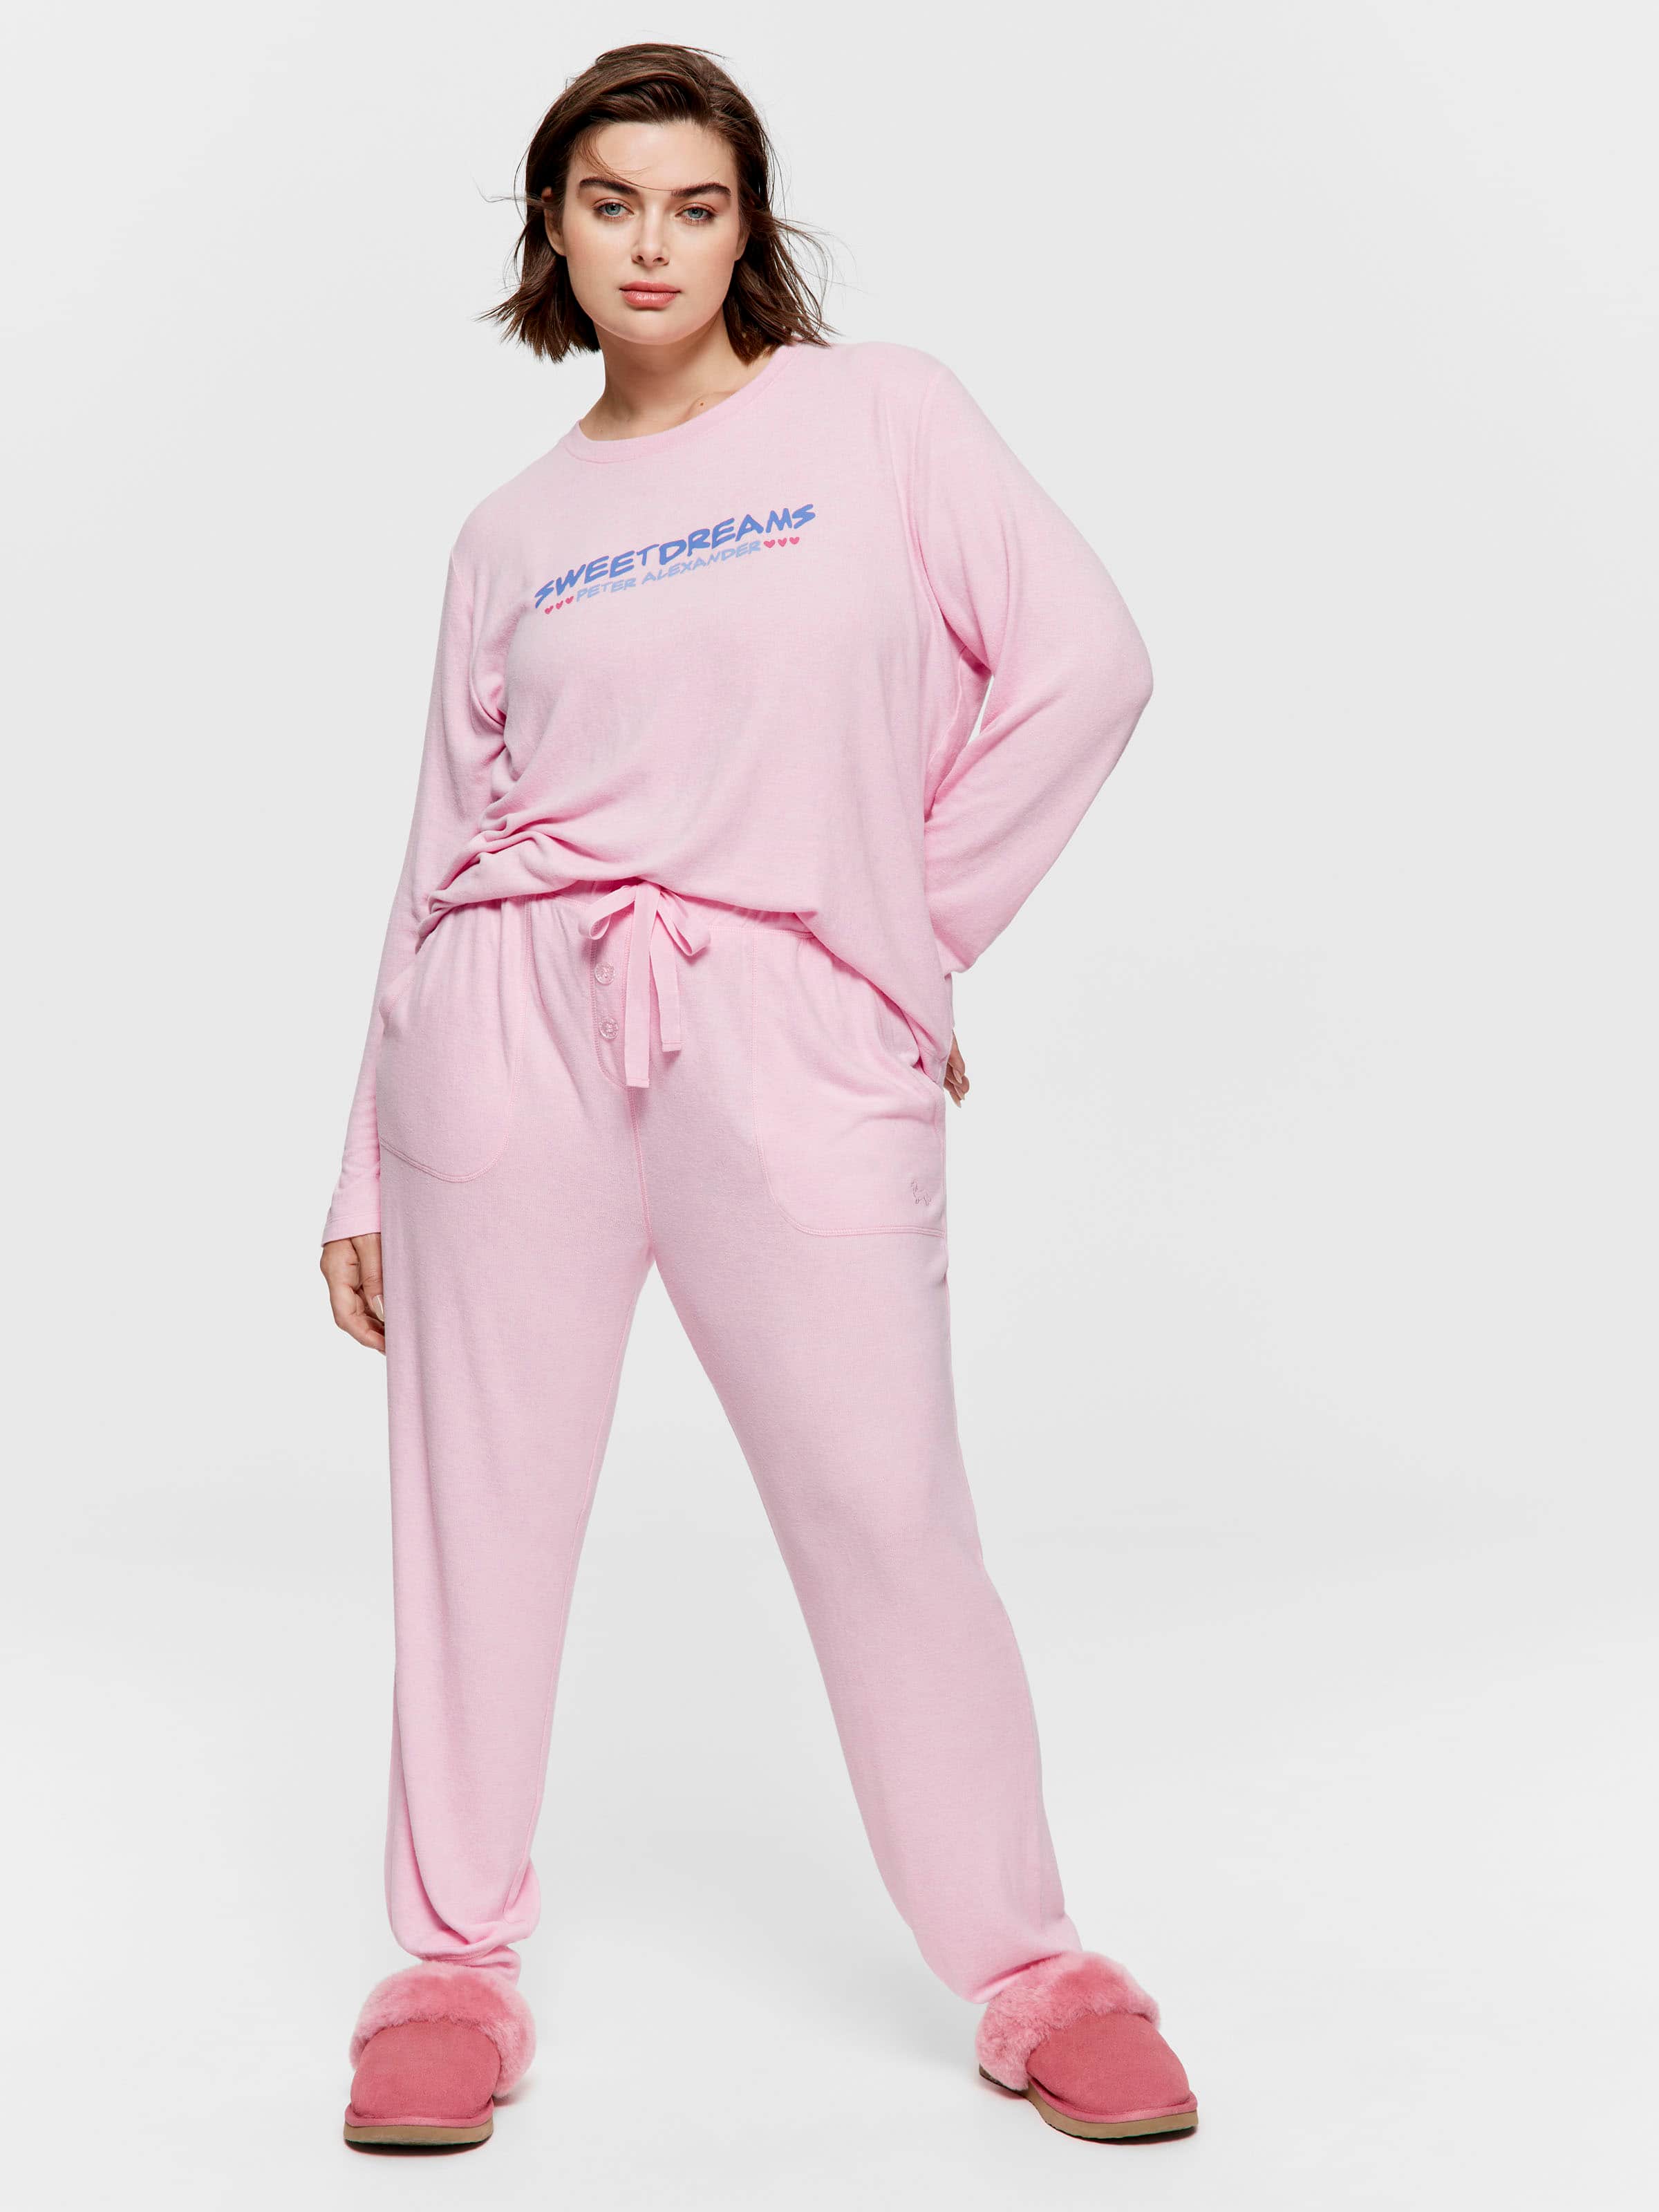 P.A. Plus Pink Marle Fuzzy Easy Pj Pant